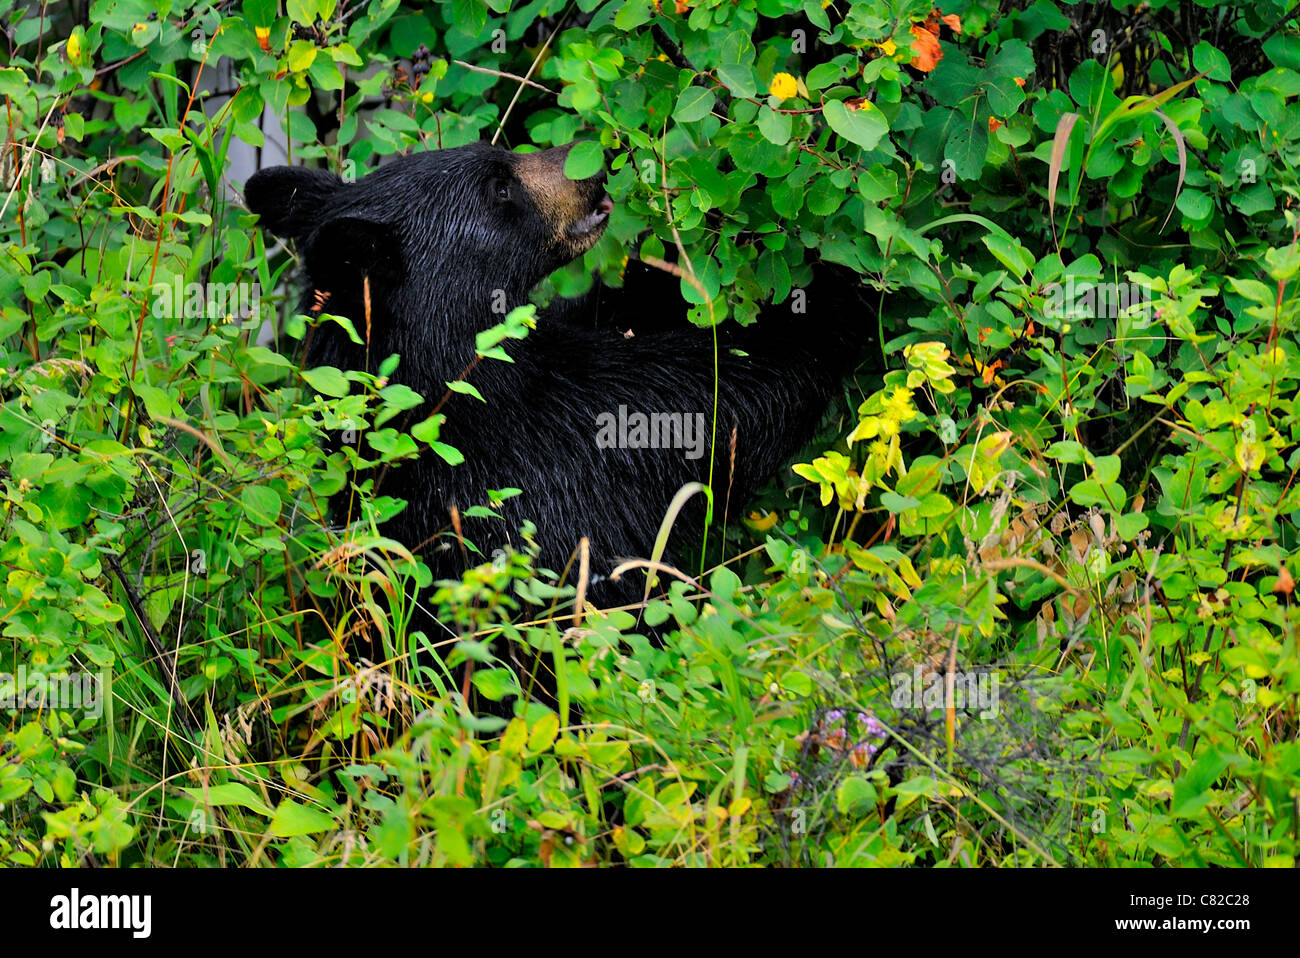 A young black bear feeding on some wild berries. Stock Photo